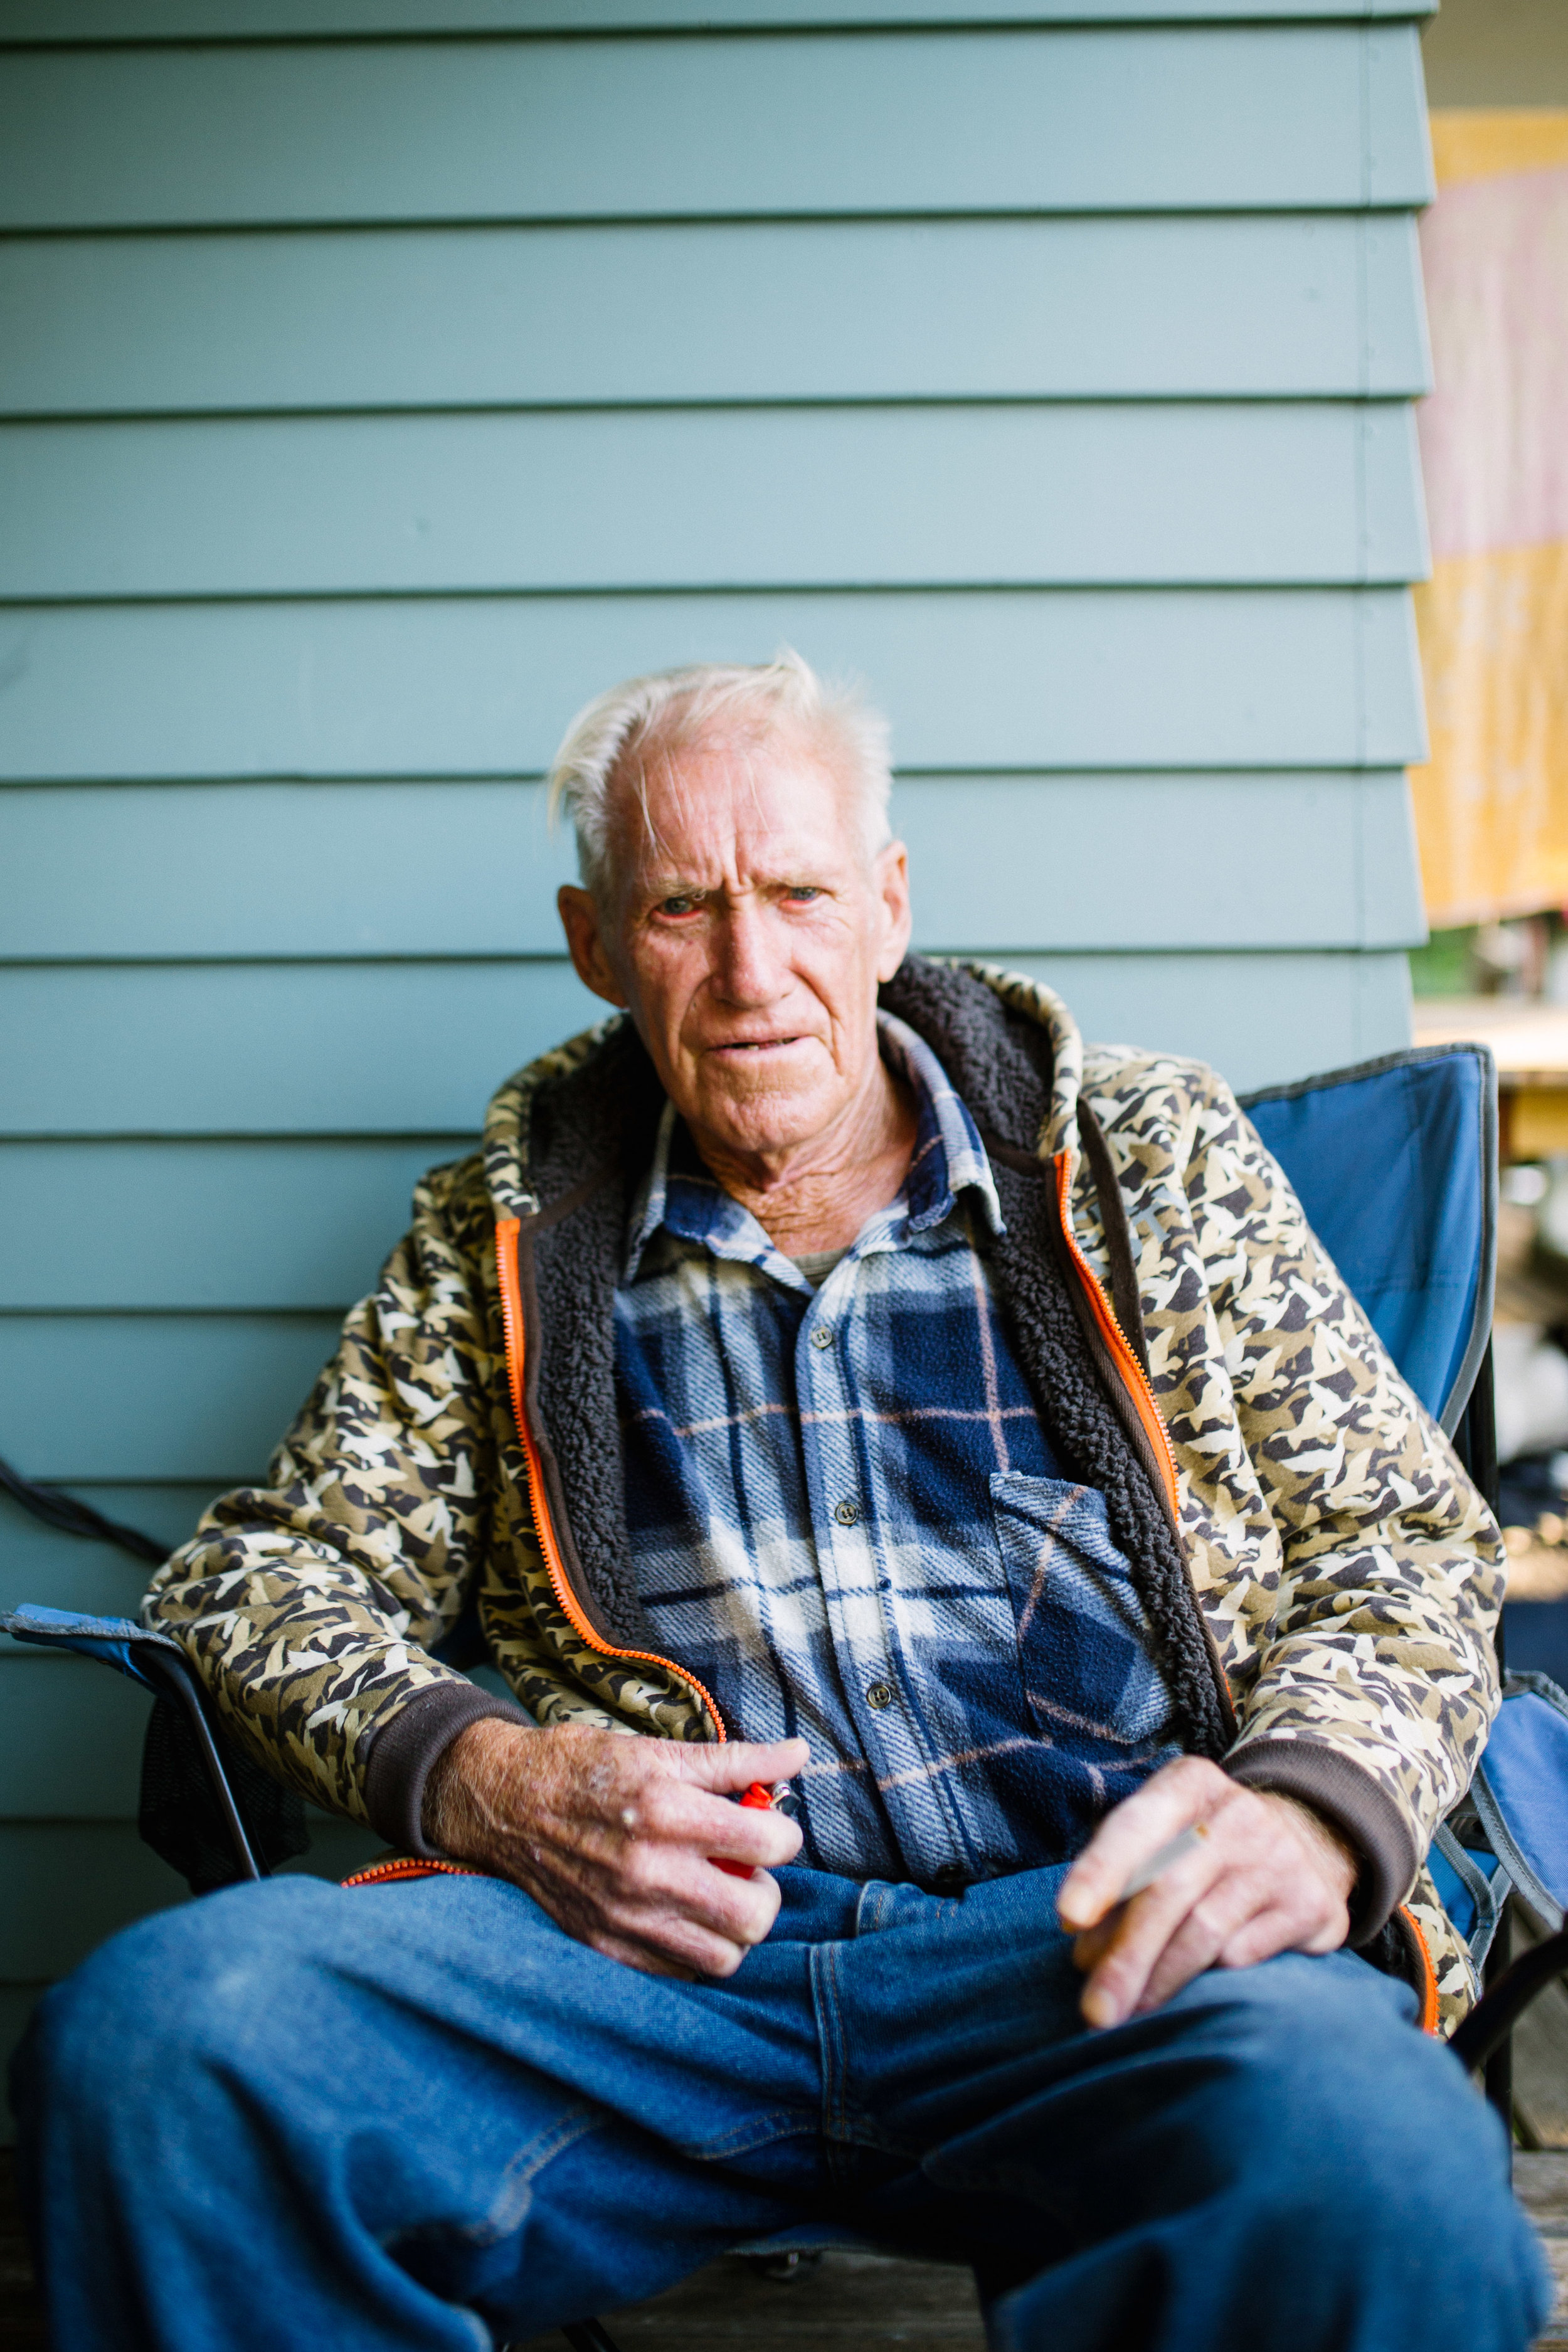  May 7 2017.  In Auckland, New Zealand, my Great Uncle Ken sat on the porch of my second cousin’s home, about to light a cigarette. Only a short while after my visit, he passed away on November 29 2017. As one of the few siblings of my Nana that was 